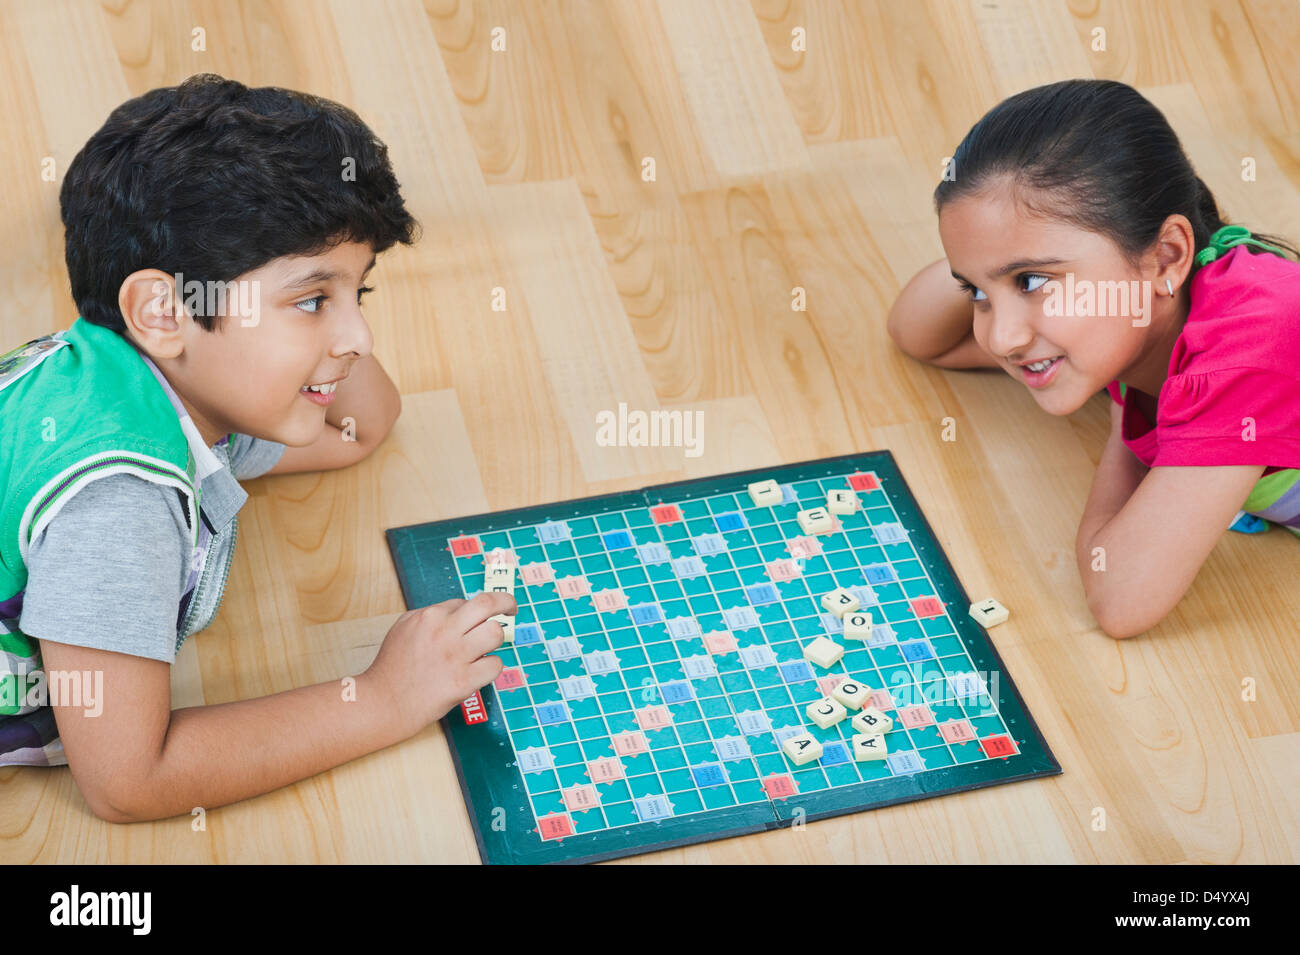 Children playing crossword puzzle game Stock Photo